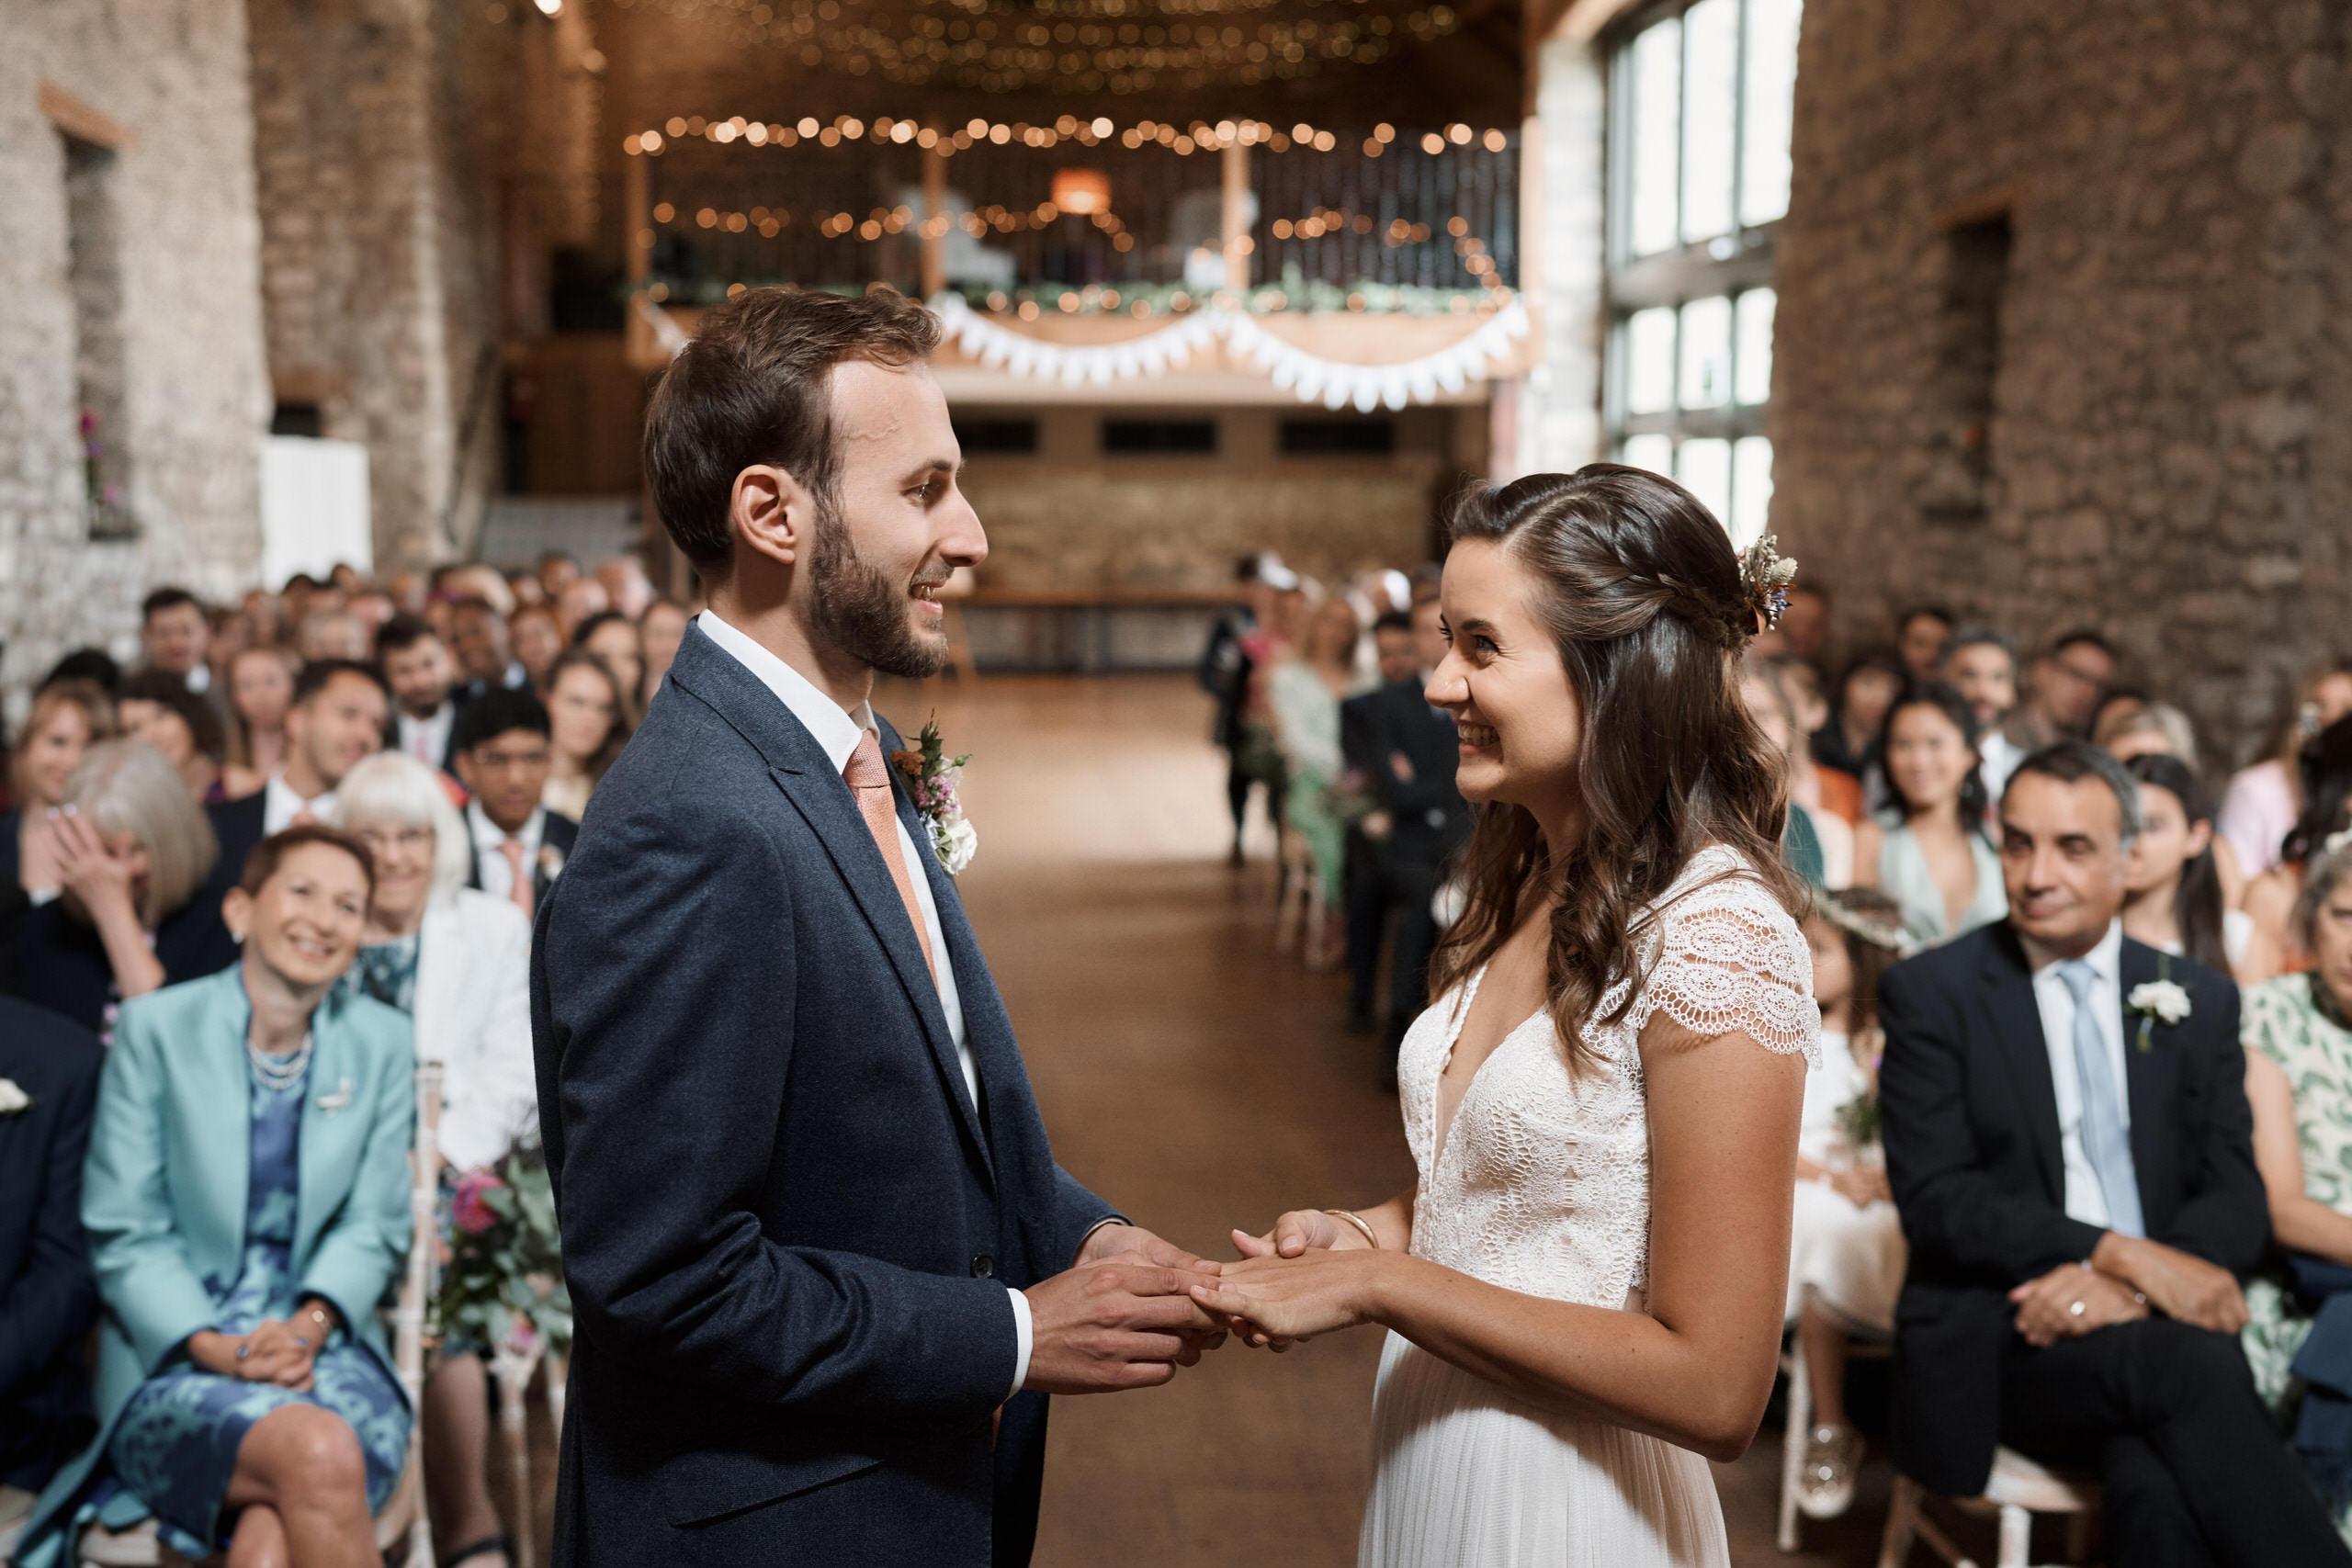 A couple gets married in a barn by swapping their promises.